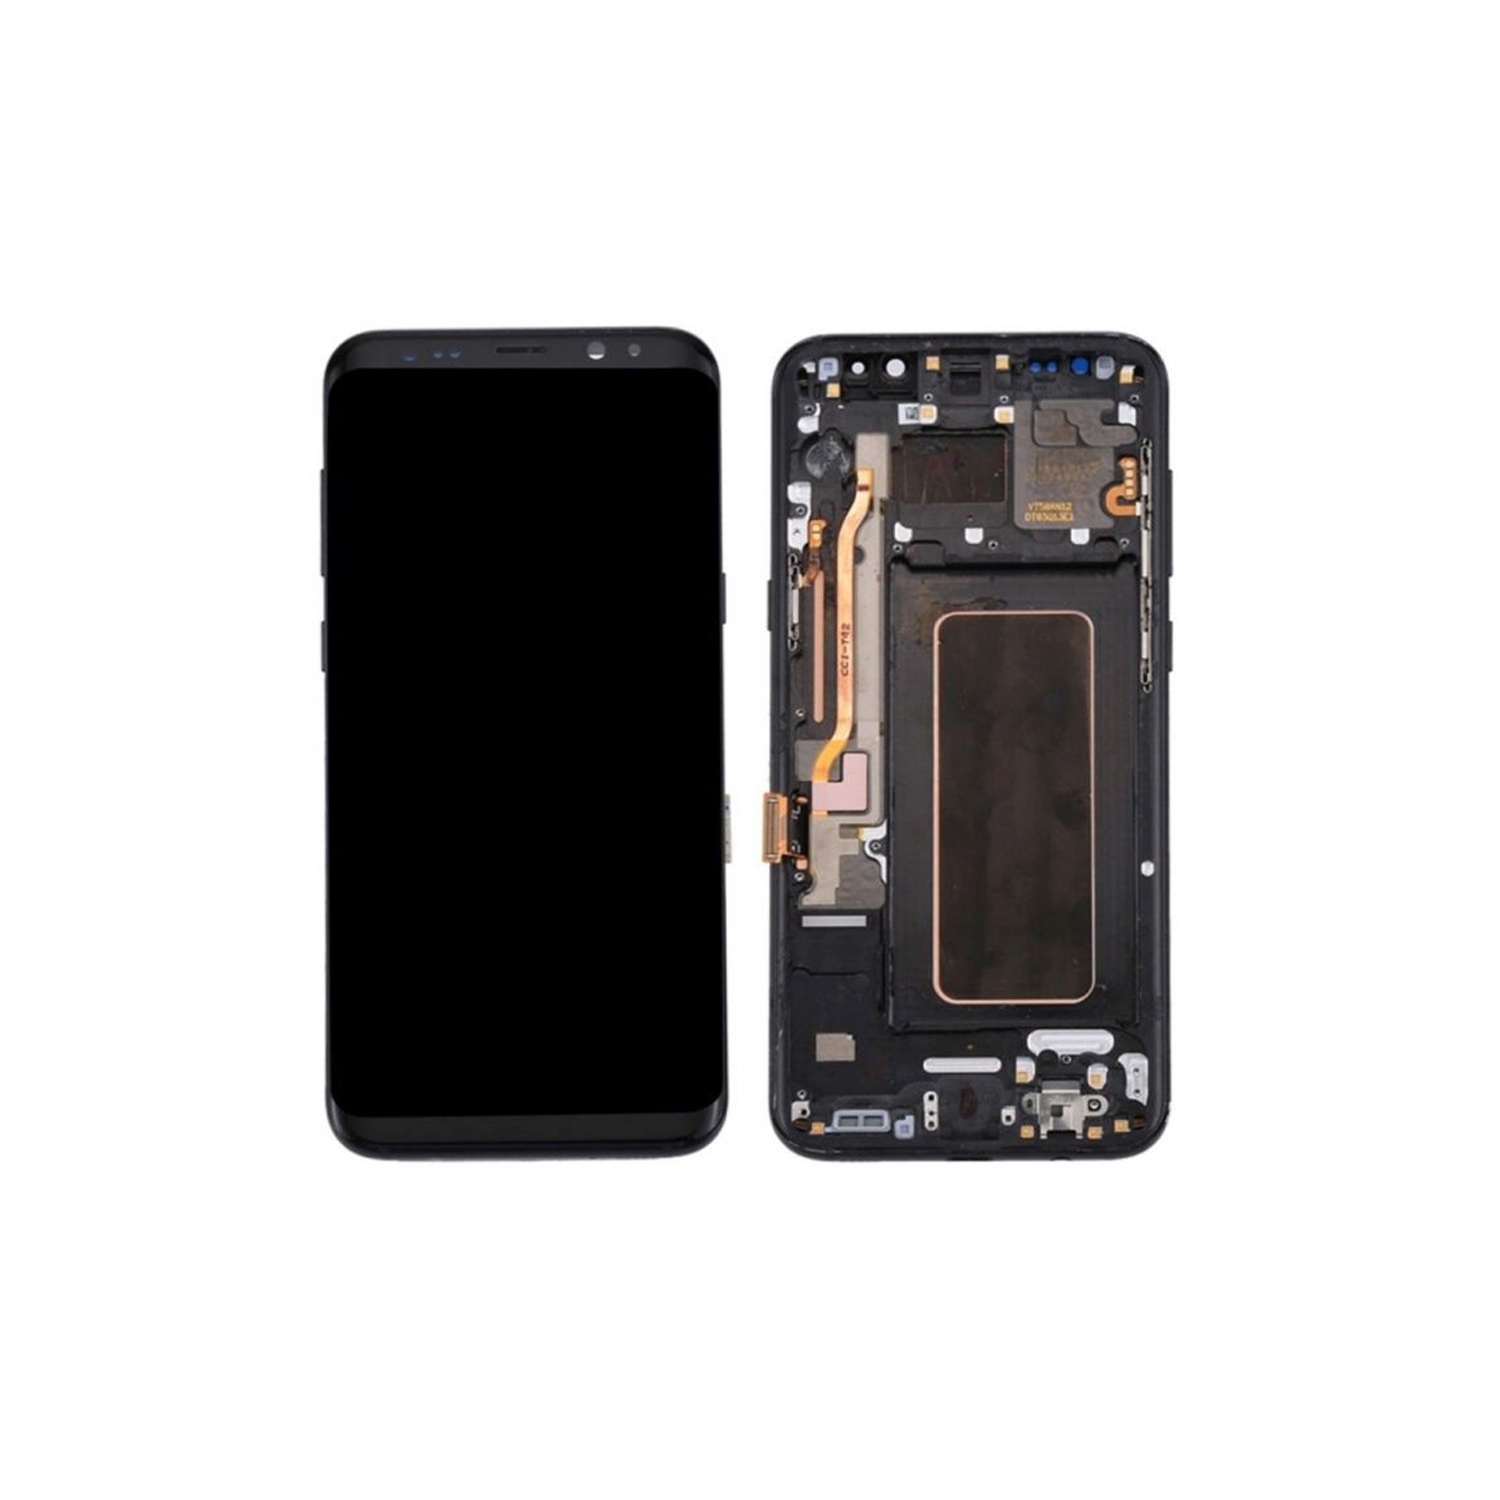 Replacement OLED Display + Digitizer Touch Screen Assembly For Samsung Galaxy S8 G950 - Black